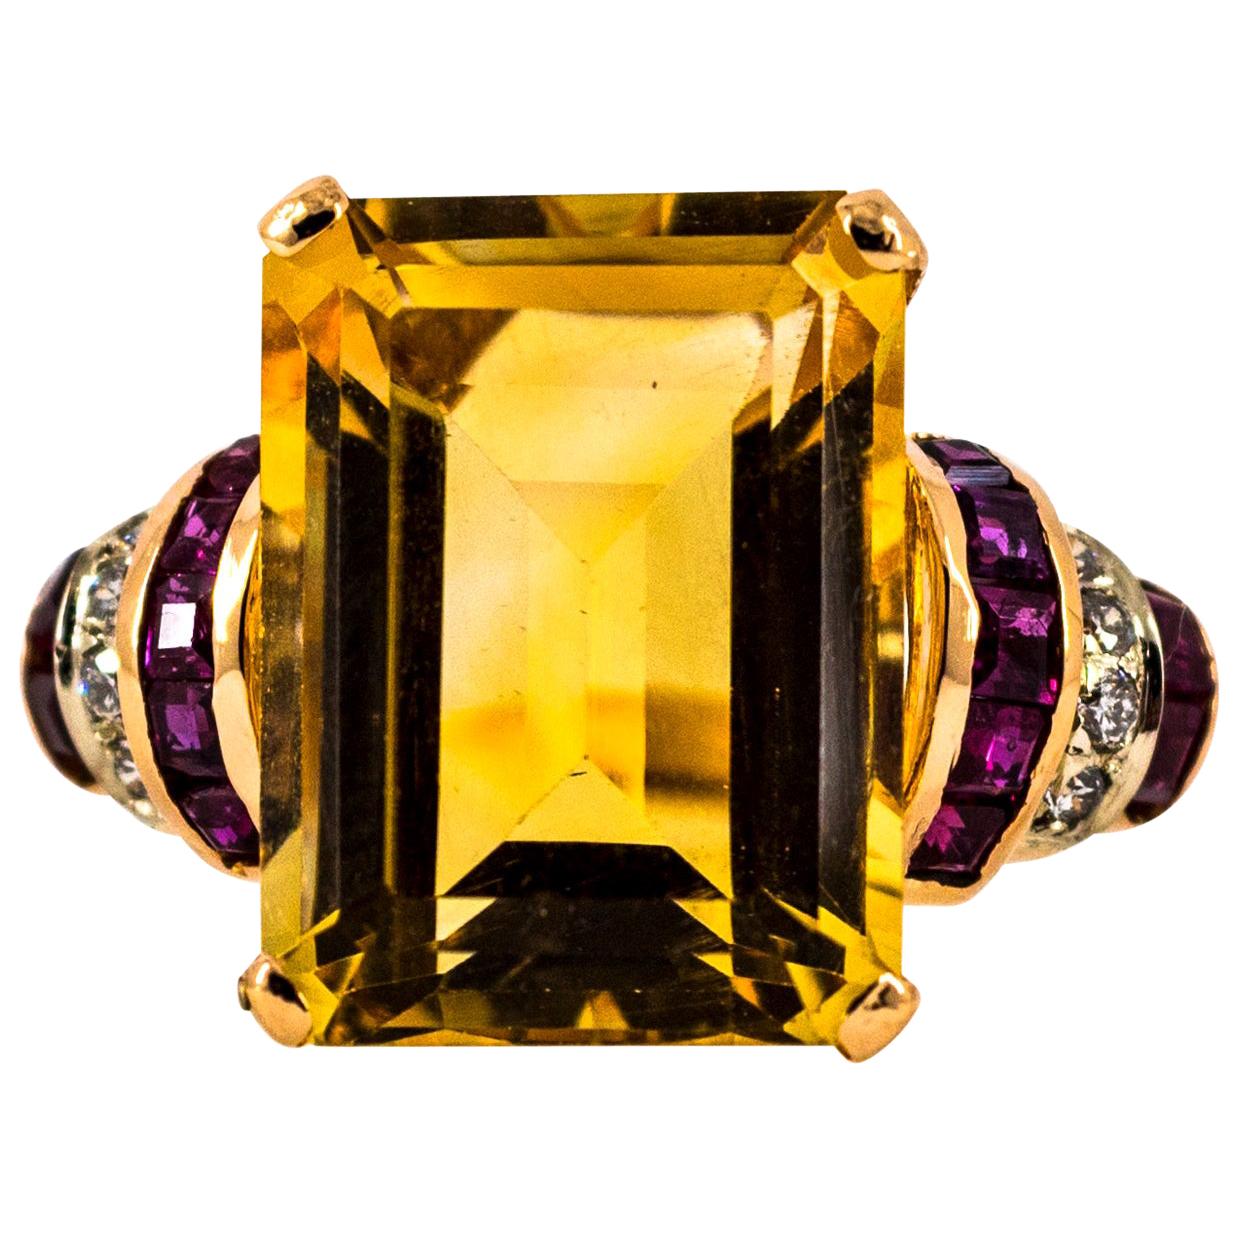 Art Deco Style 12.42 Carat White Diamond Ruby Citrine Yellow Gold Cocktail Ring